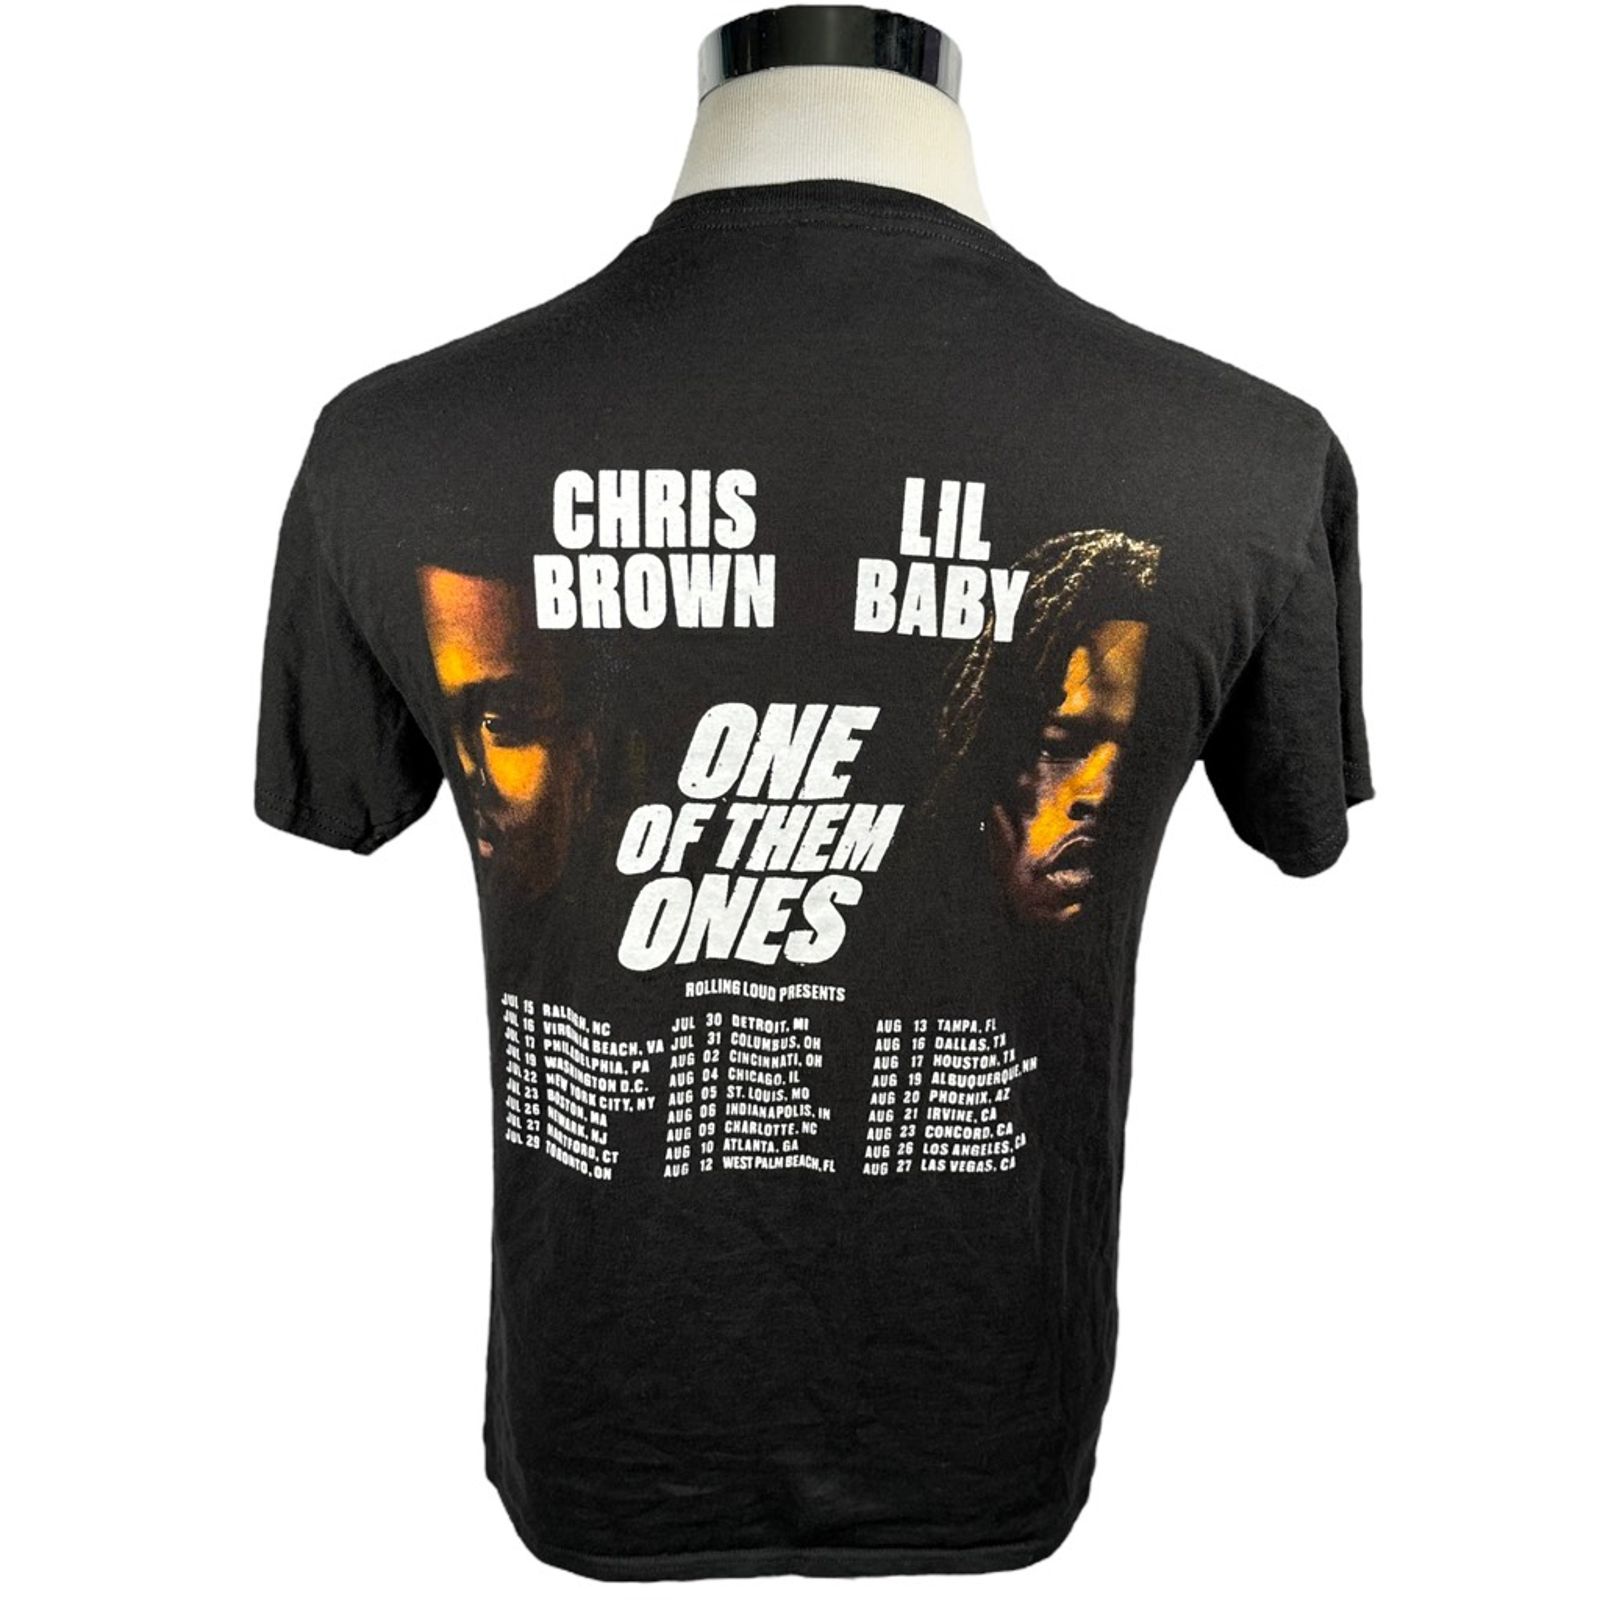 Delta Chris Brown Lil Baby Mens One Of Those Ones T-Shirt Black M Size US M / EU 48-50 / 2 - 2 Preview